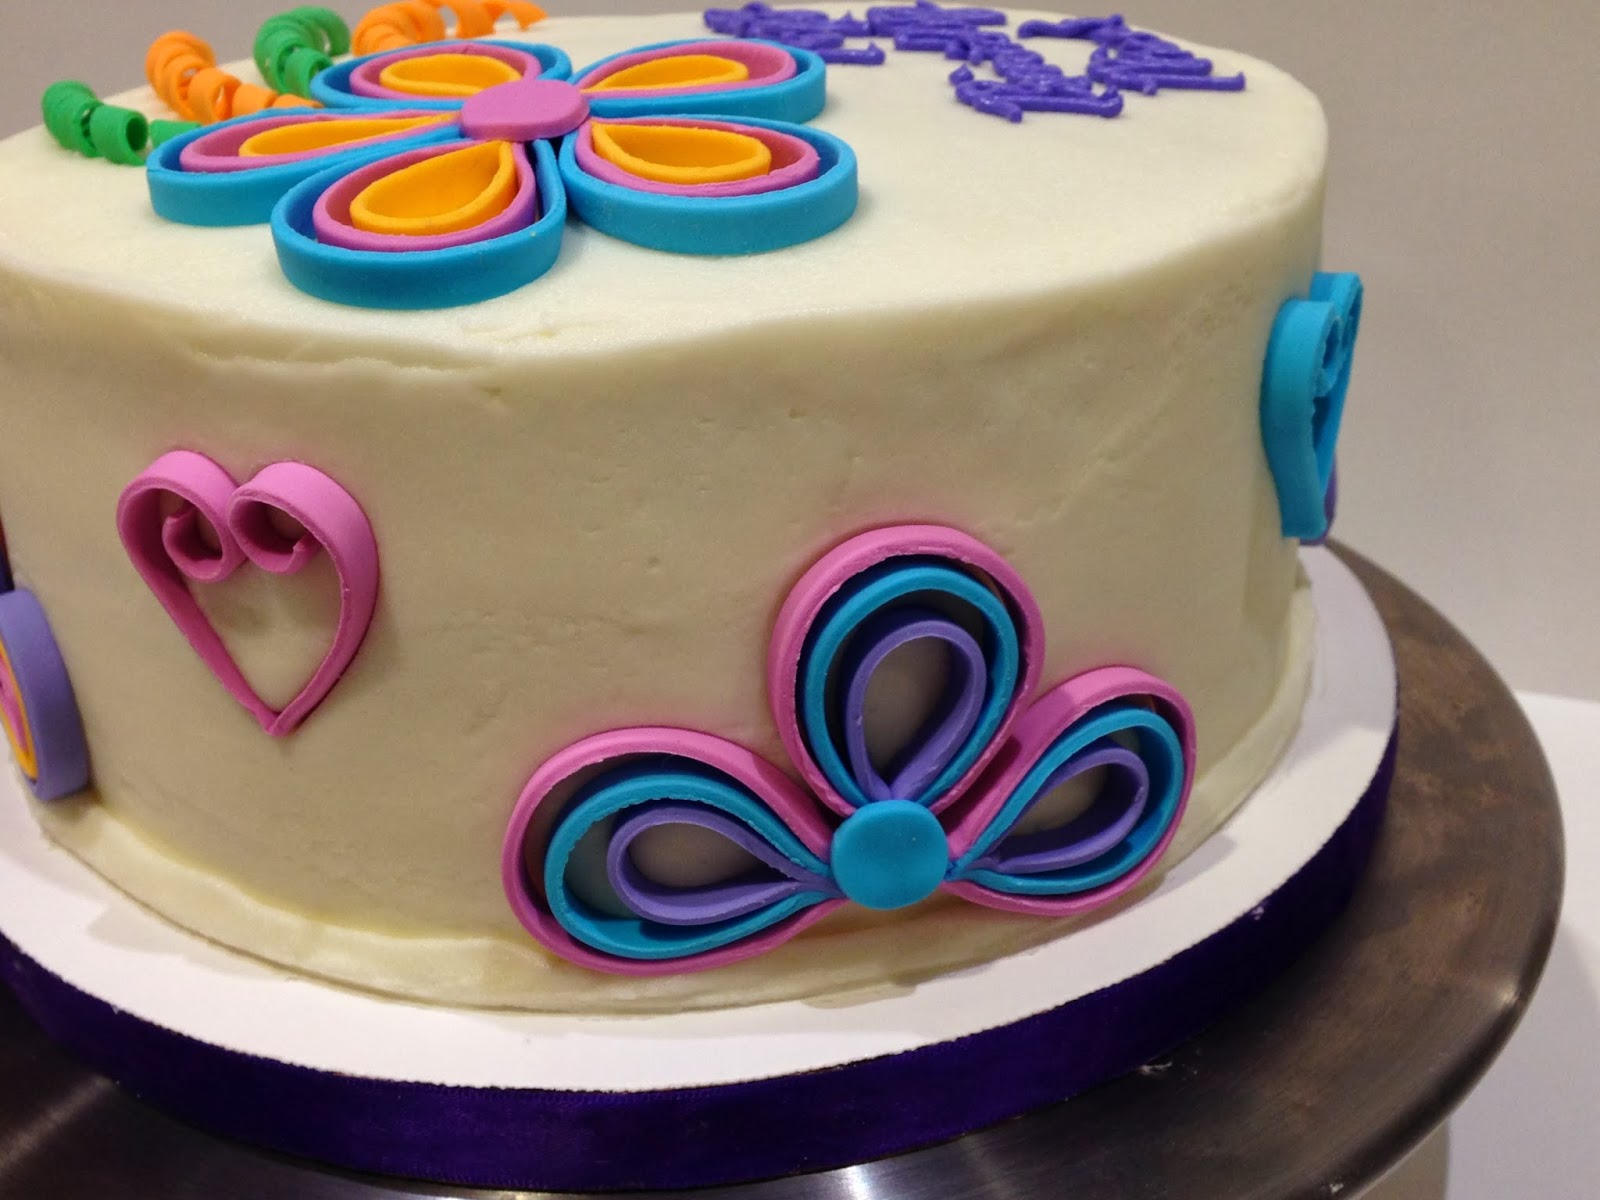 Julie's Custom Confections: Completely Nut Free Birthday Cake